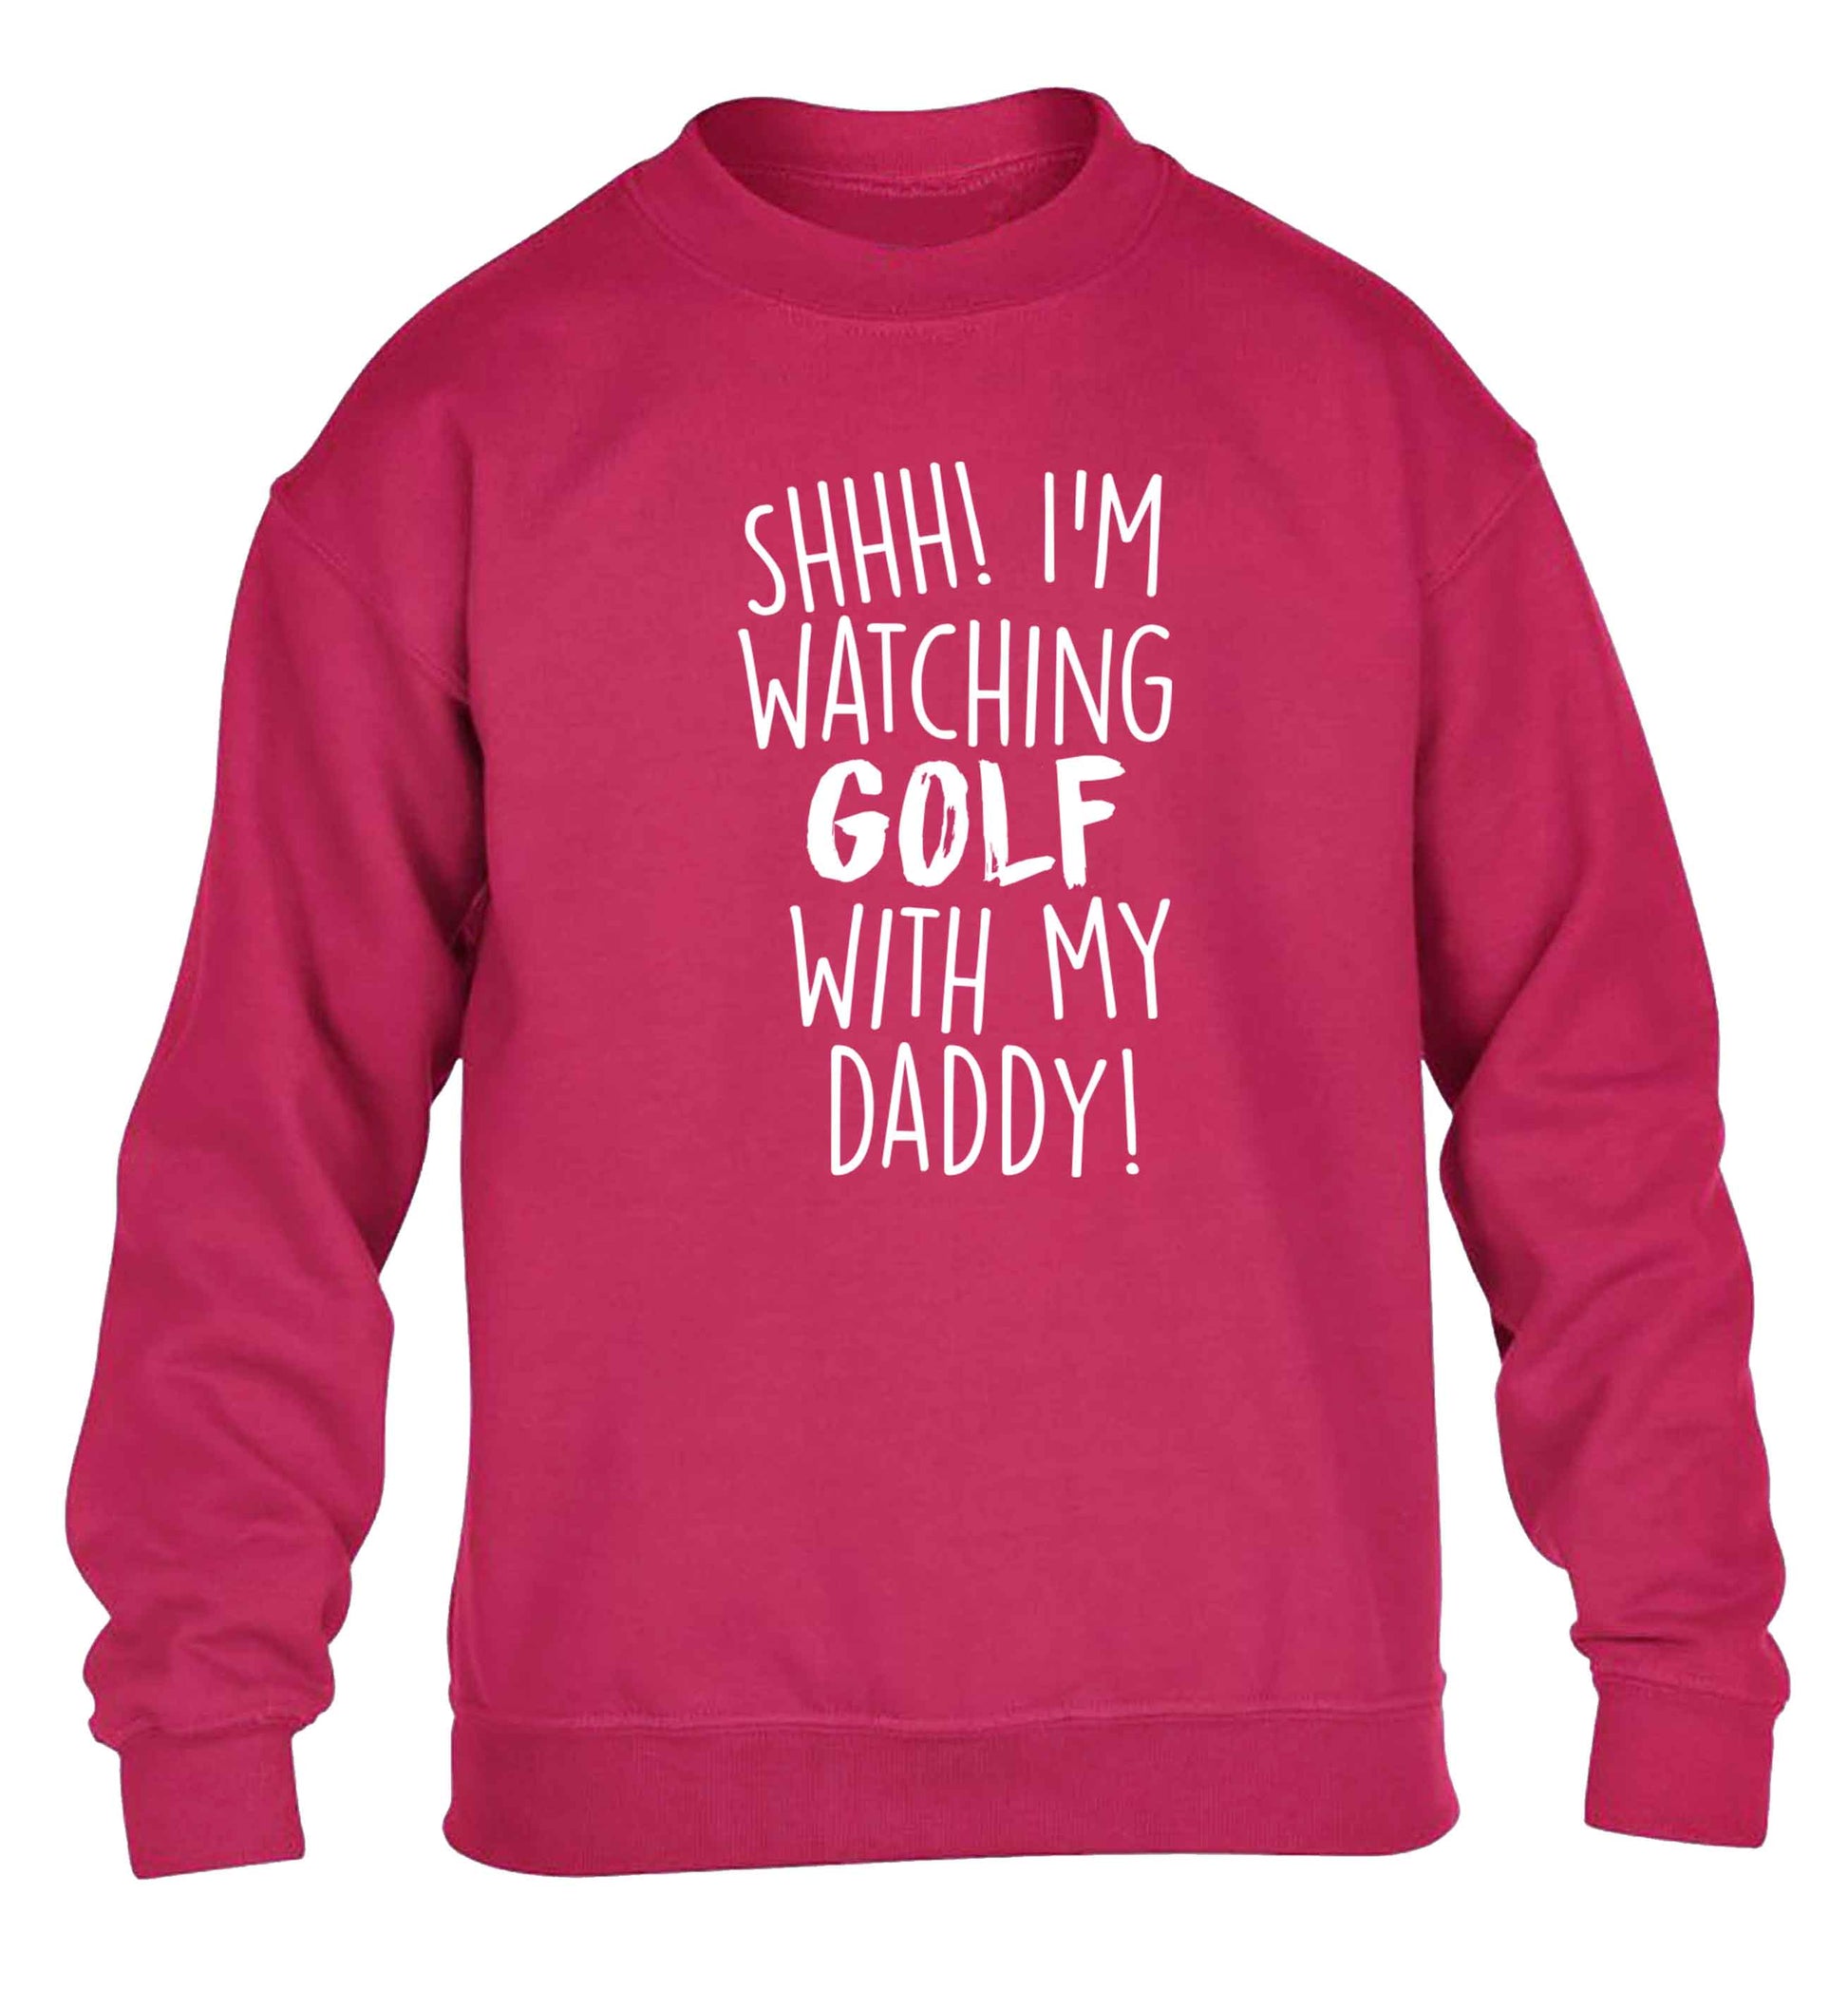 Shh I'm watching golf with my daddy children's pink sweater 12-13 Years